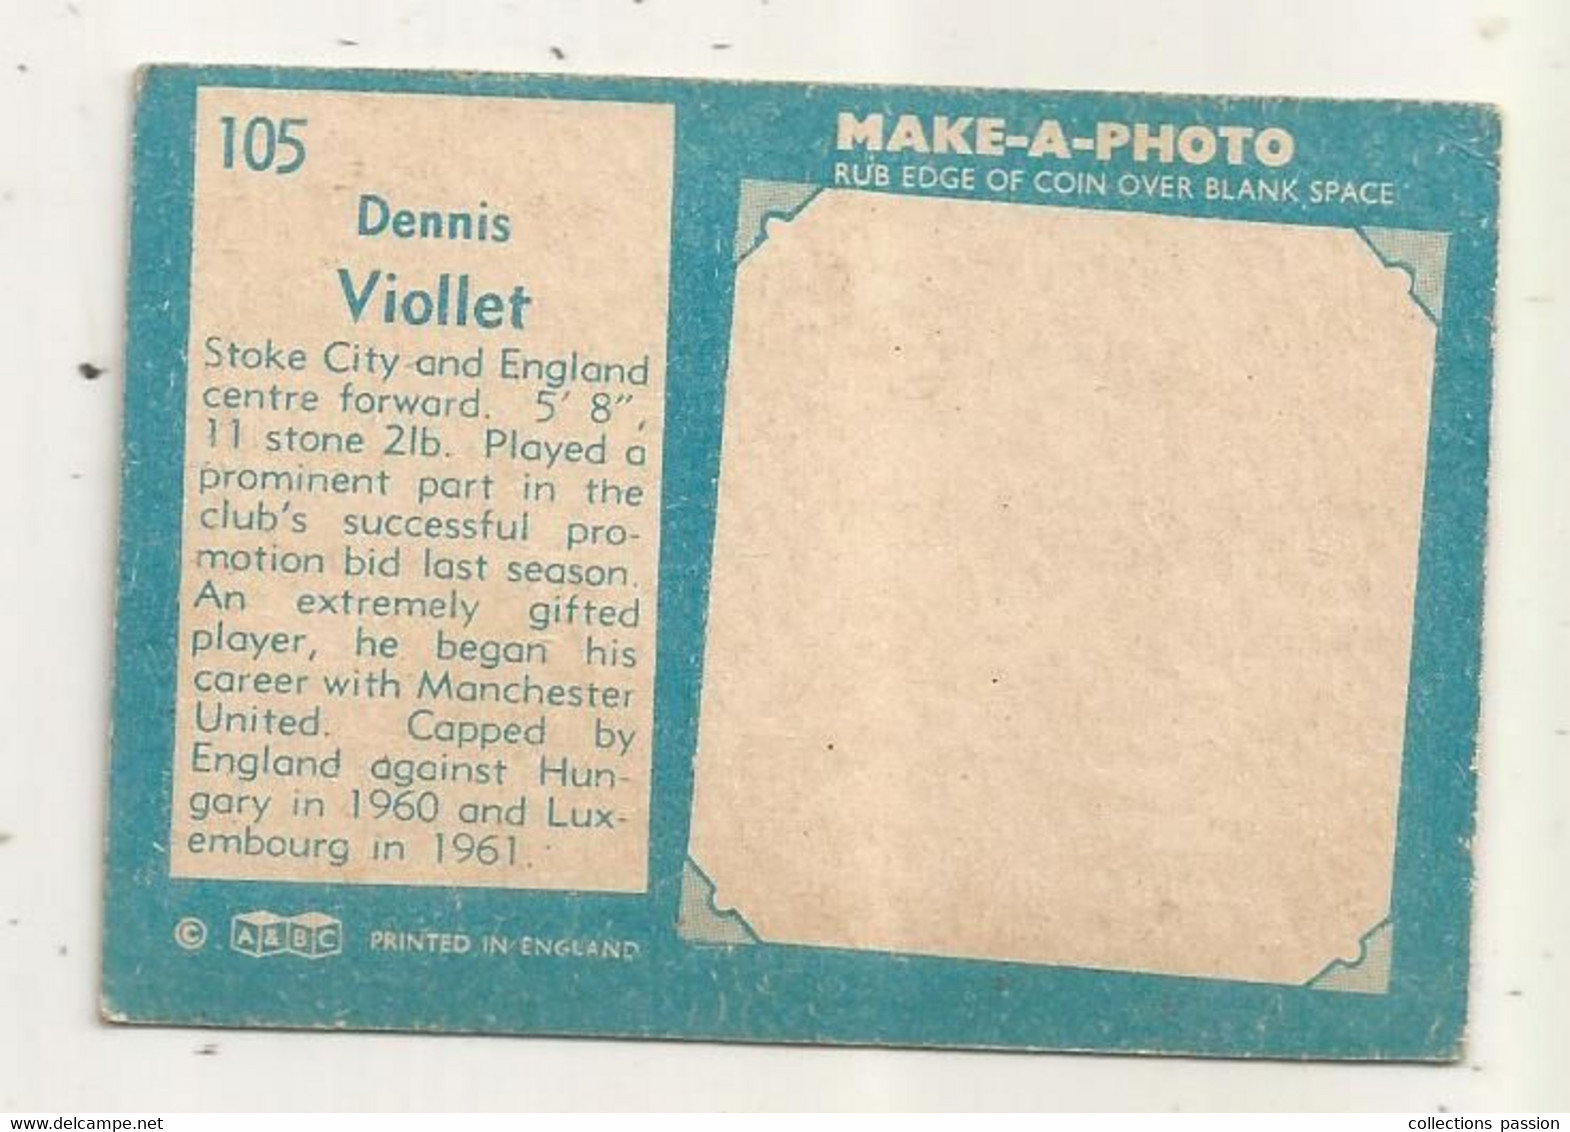 Trading Card , A&BC , England, Chewing Gum, Serie: Make A Photo , Année 60 , N° 105, DENNIS VIOLLET, Stoke City - Tarjetas